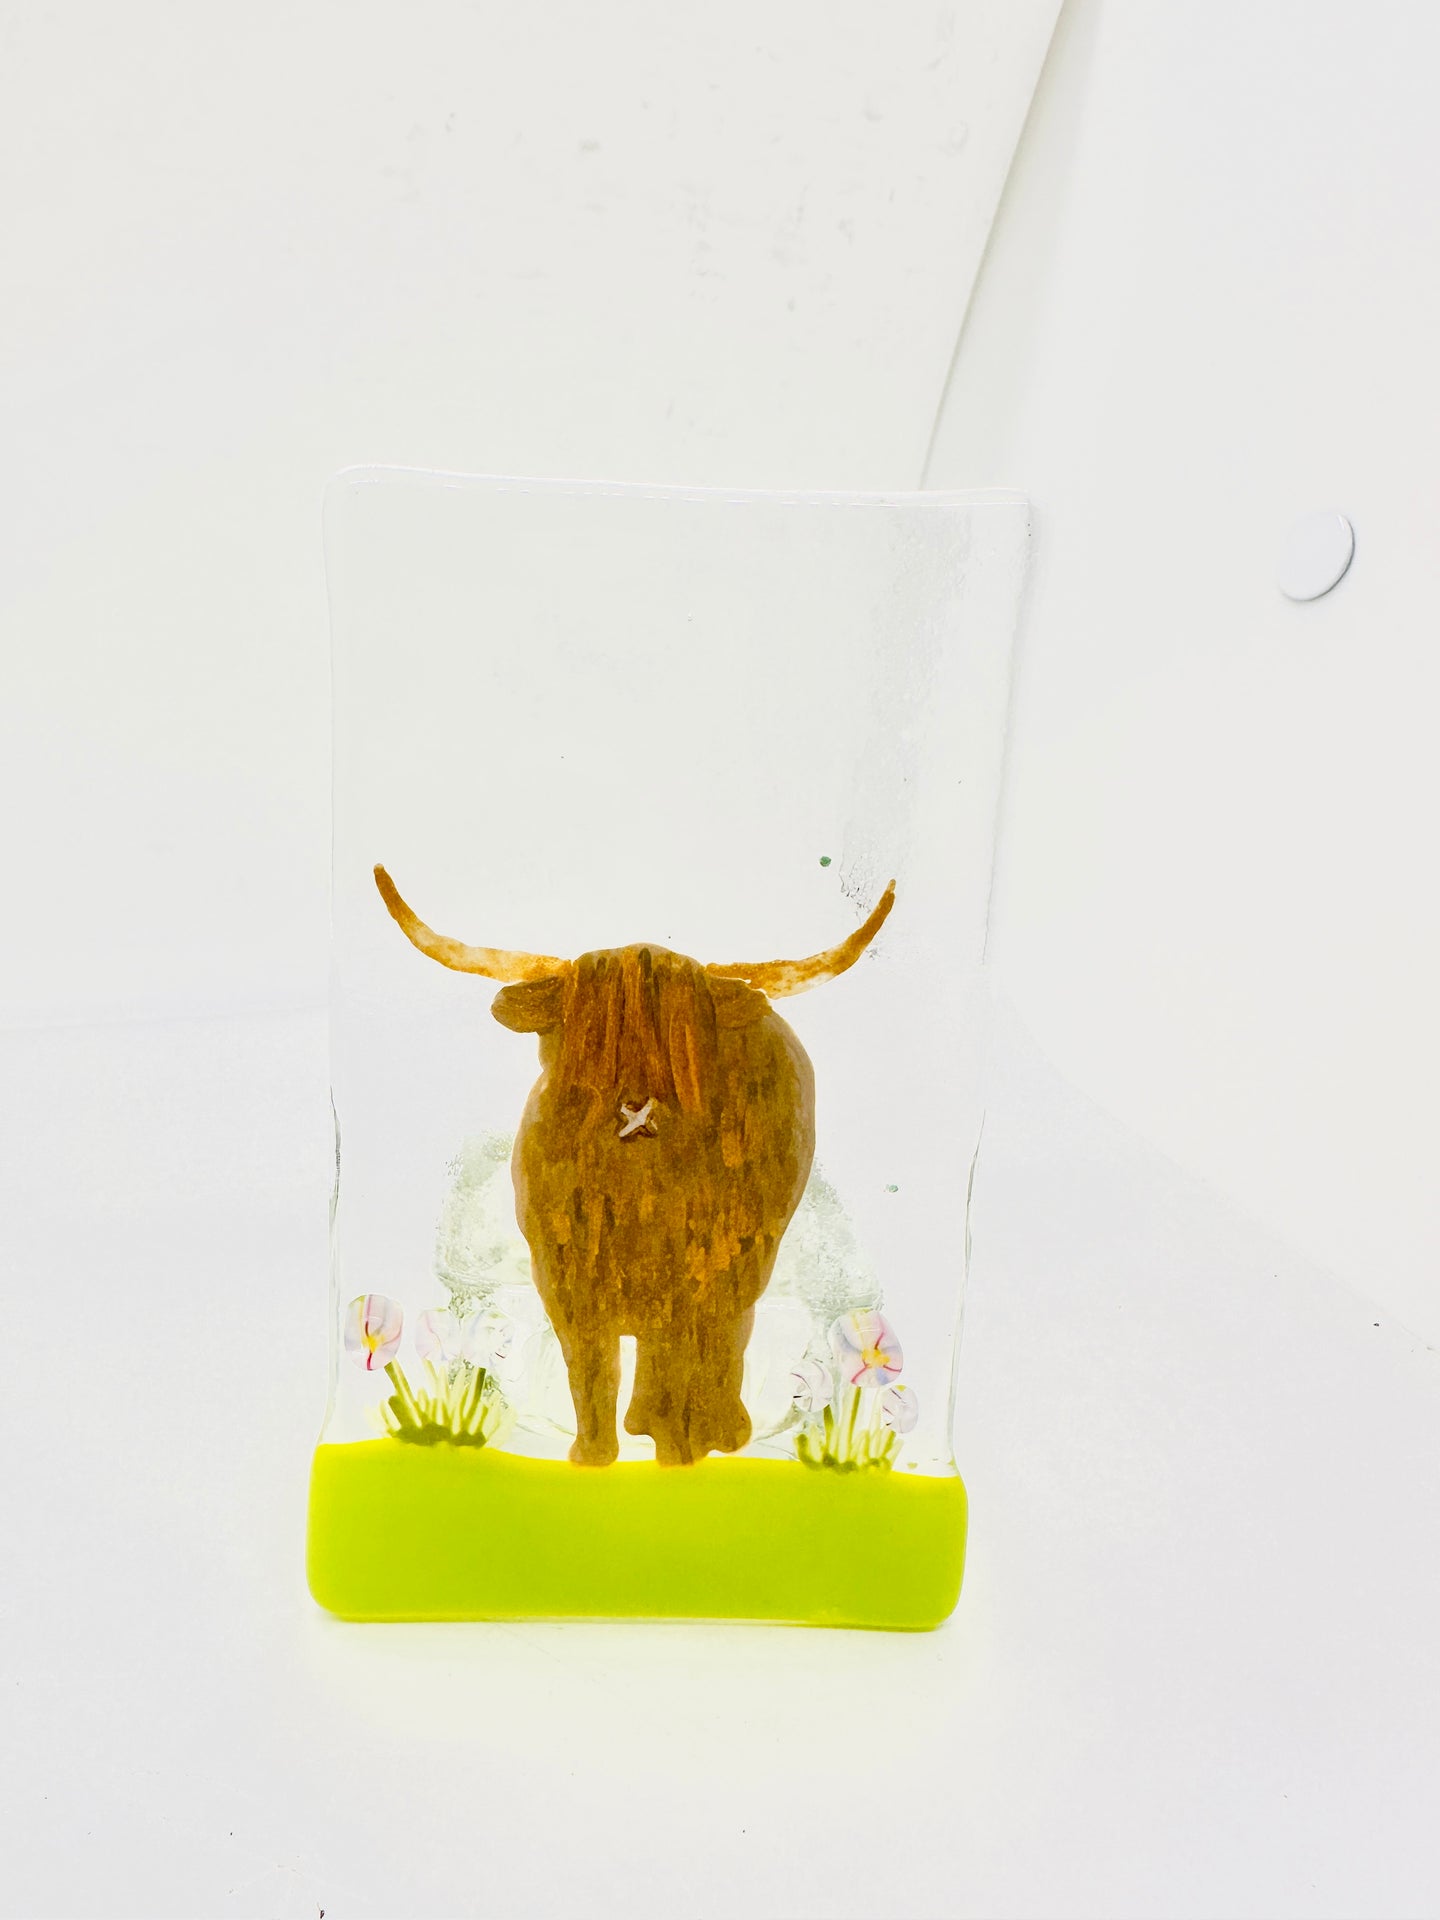 Fused Glass Highland Cow TeaLight Holder